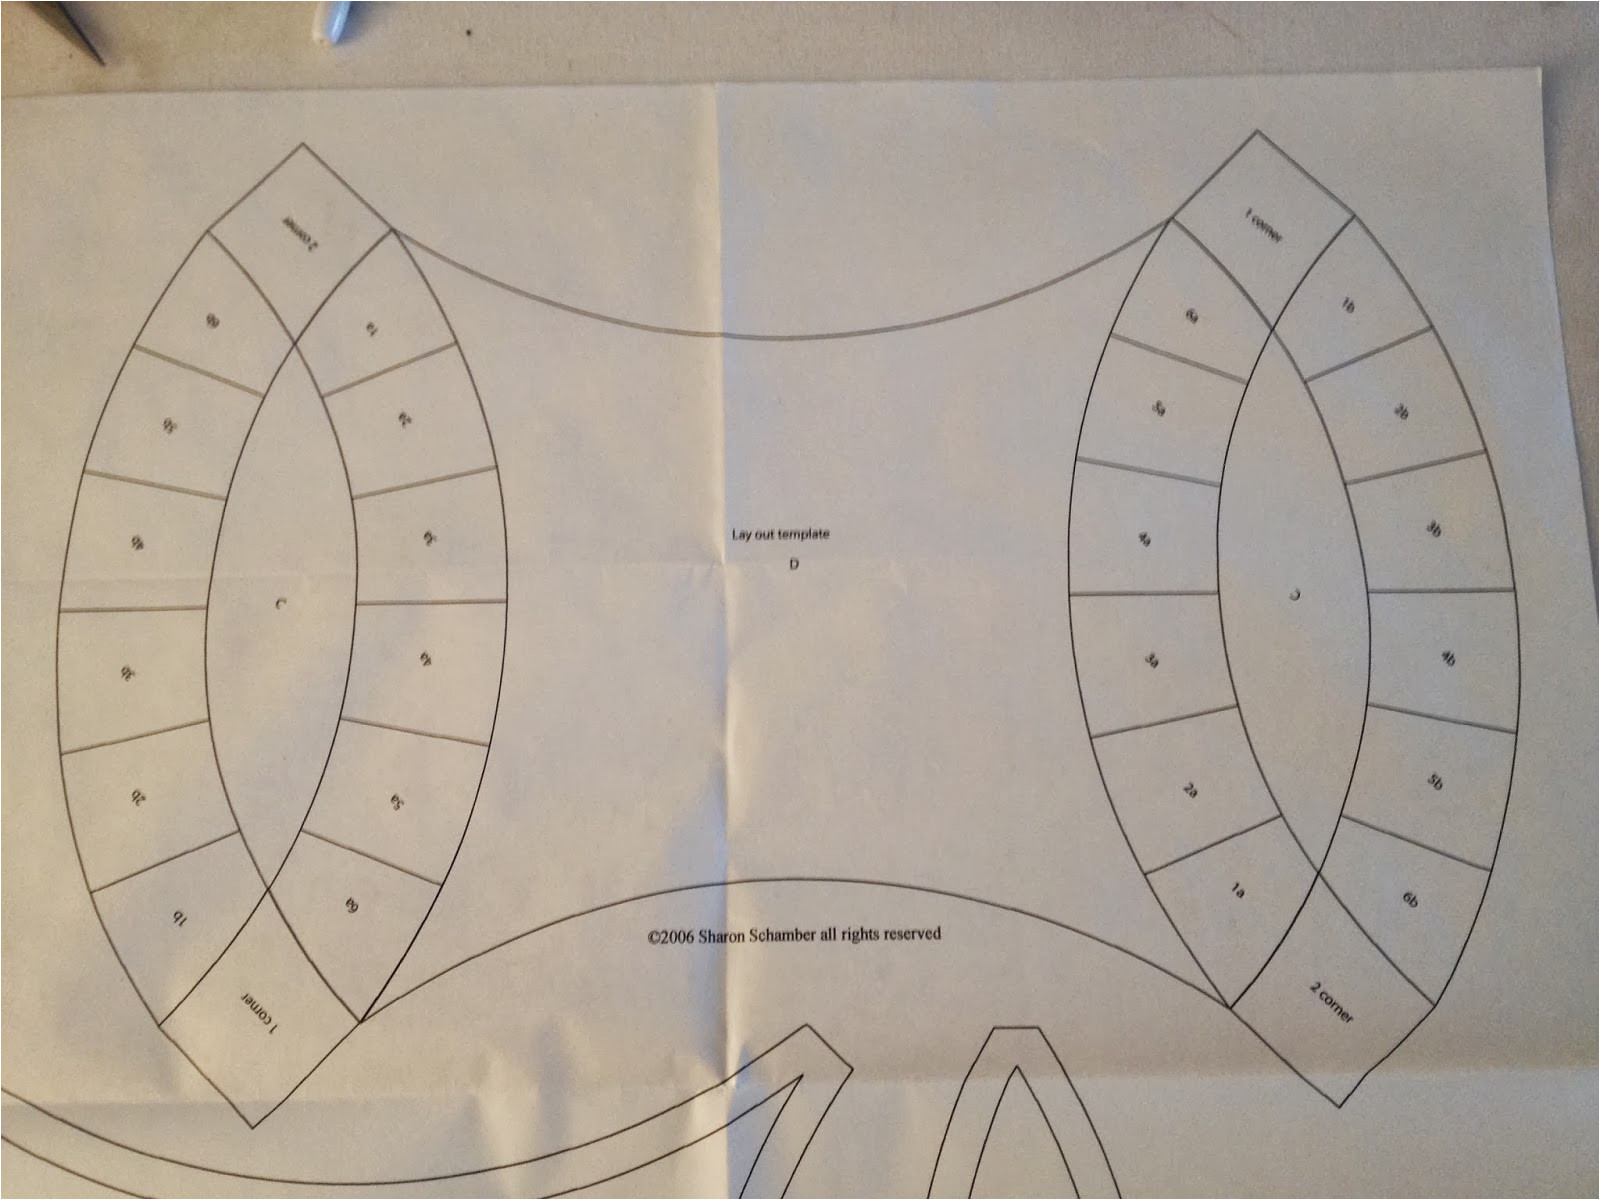 35883395 double wedding ring quilt along preparing the templates